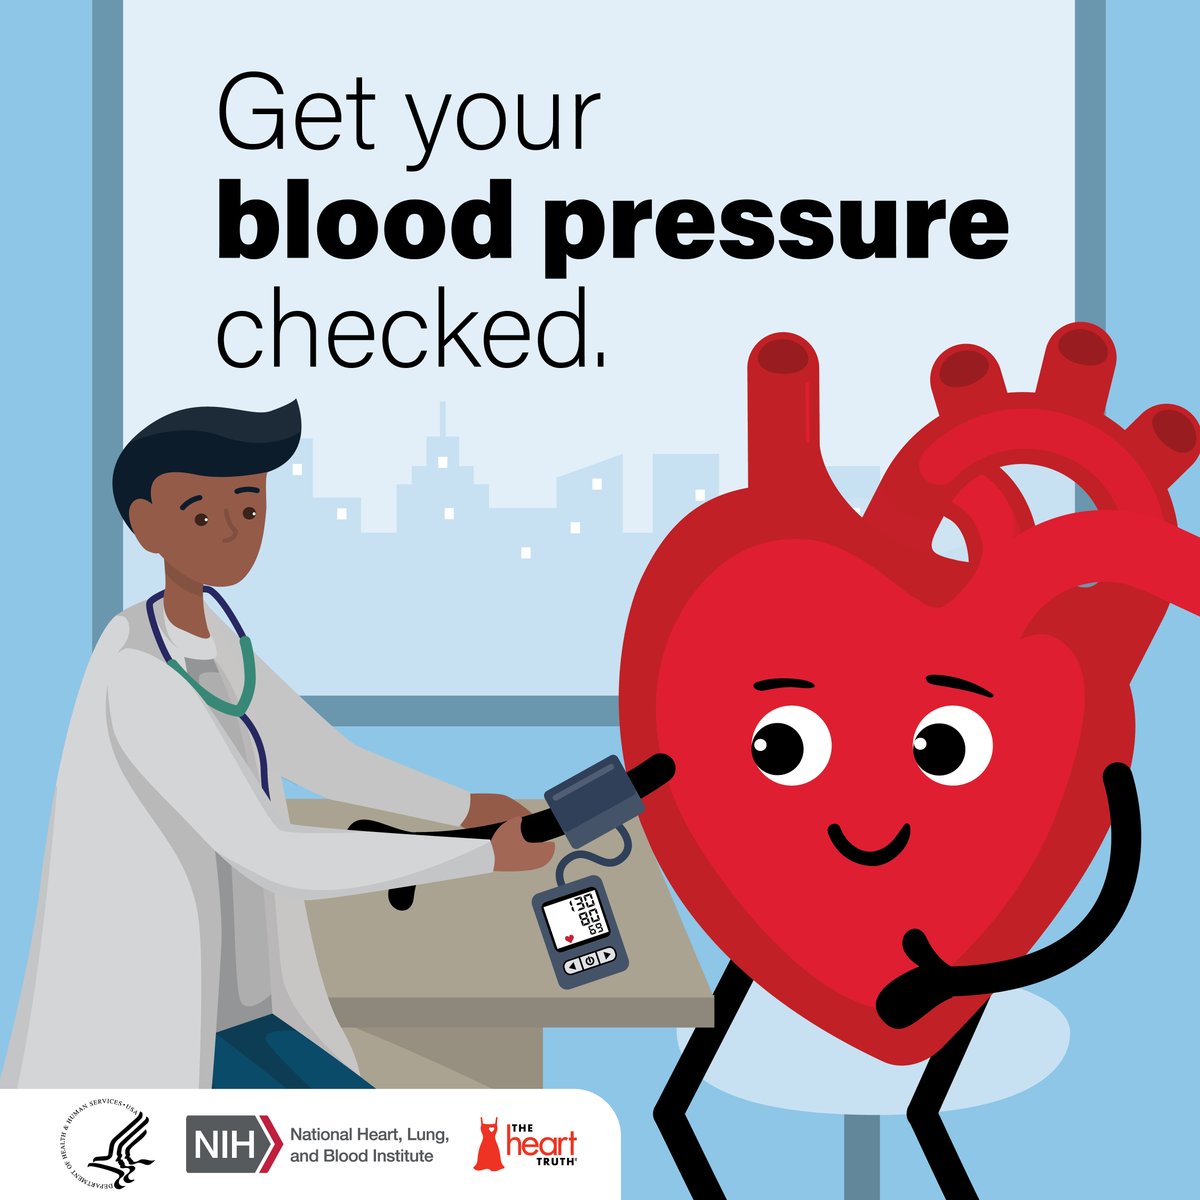 It's important to know what your blood pressure is and how to keep it in a healthy range. To help you keep track, get your blood pressure checked by a healthcare provider at each visit. go.nih.gov/wWcFrfu #HighBloodPressureMonth